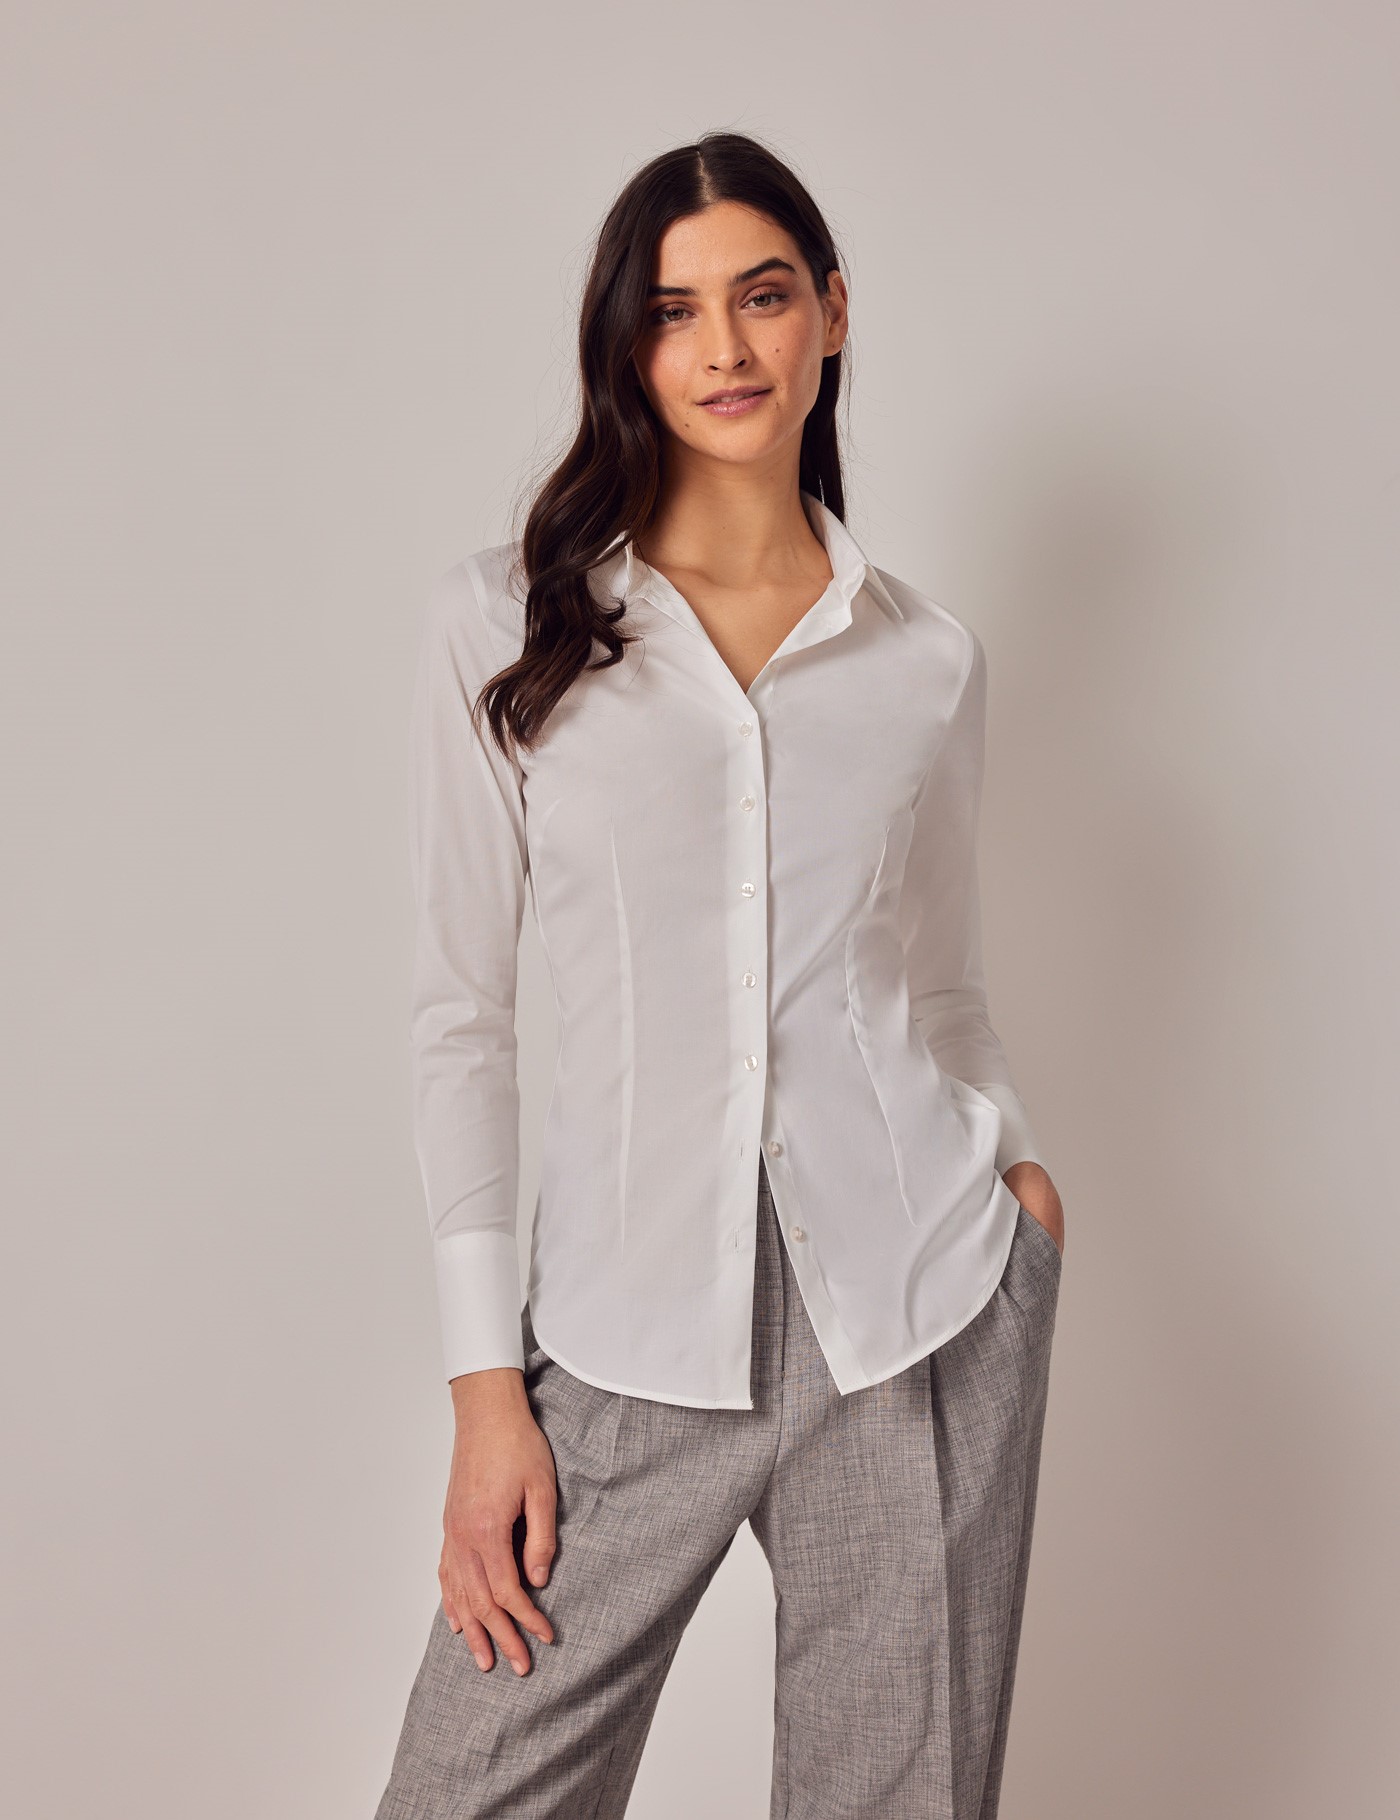 Materialisme Op maat vacuüm Women's White Fitted Cotton Stretch Shirt - Single Cuffs | Hawes and Curtis